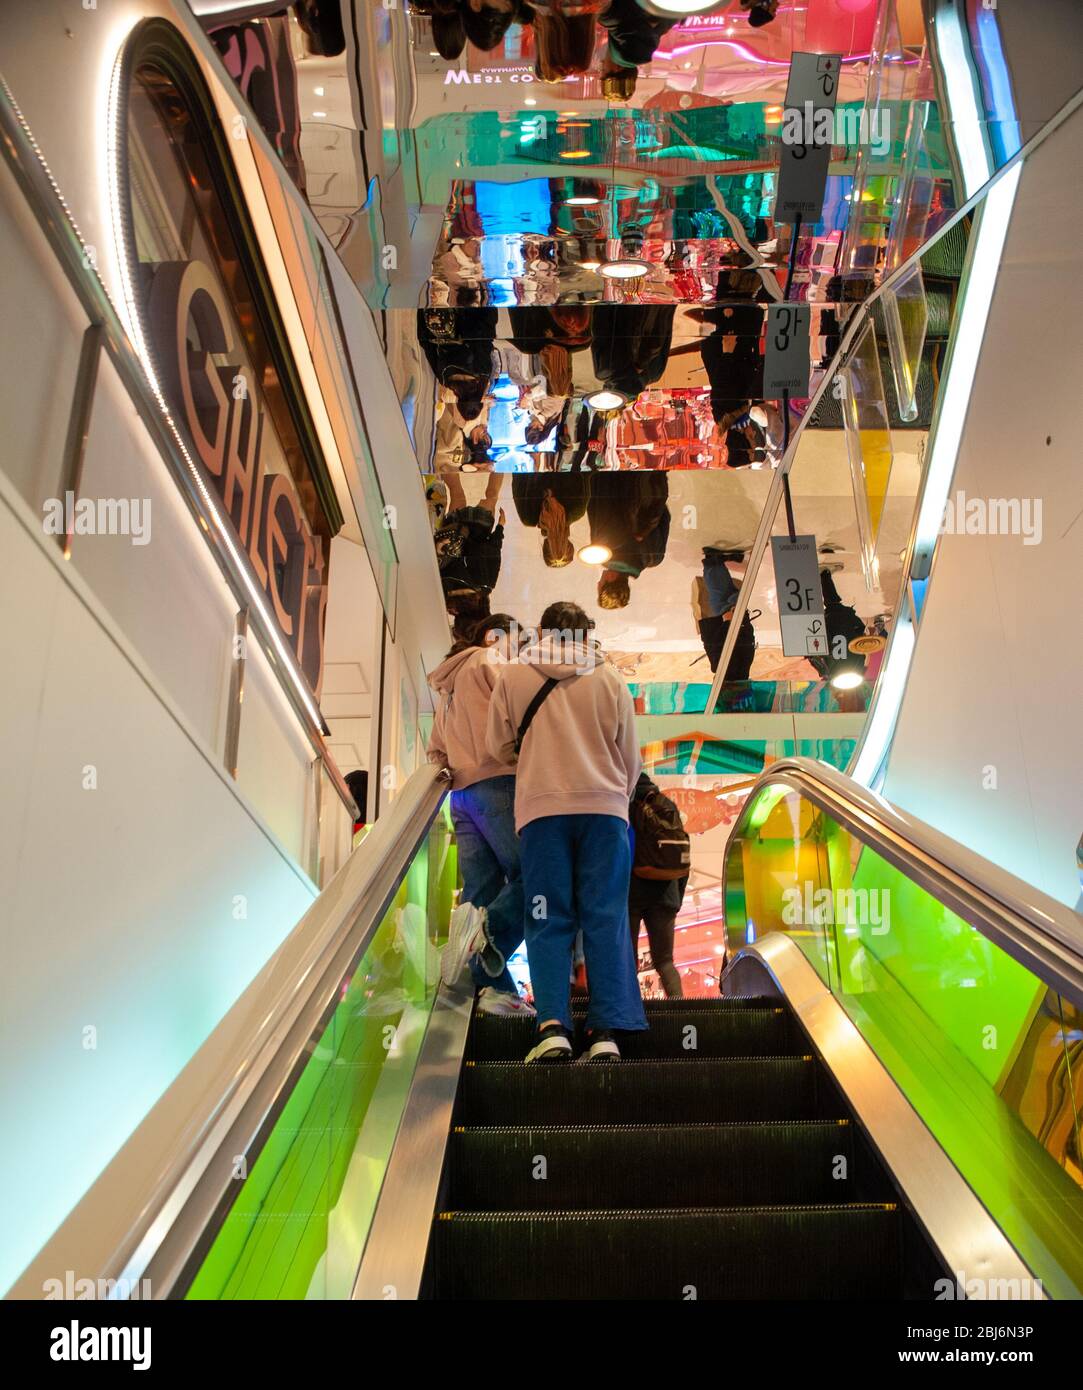 shoppers use the escalators inside 109 department store building, at the heart of Shibuya center in Tokyo, Japan Stock Photo